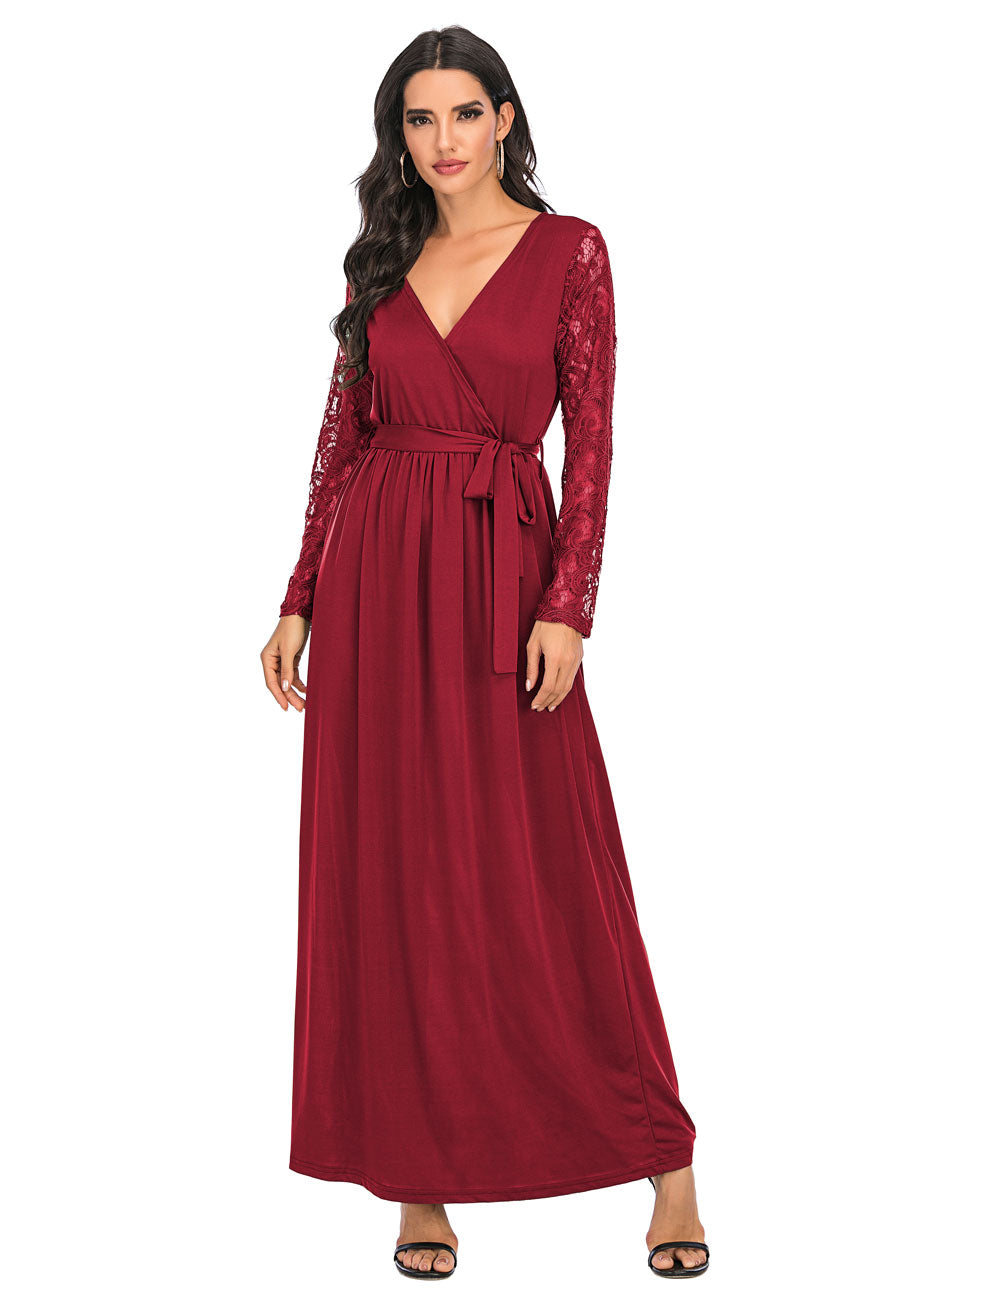 Vintage Style Maxi Dress with Lace Sleeves